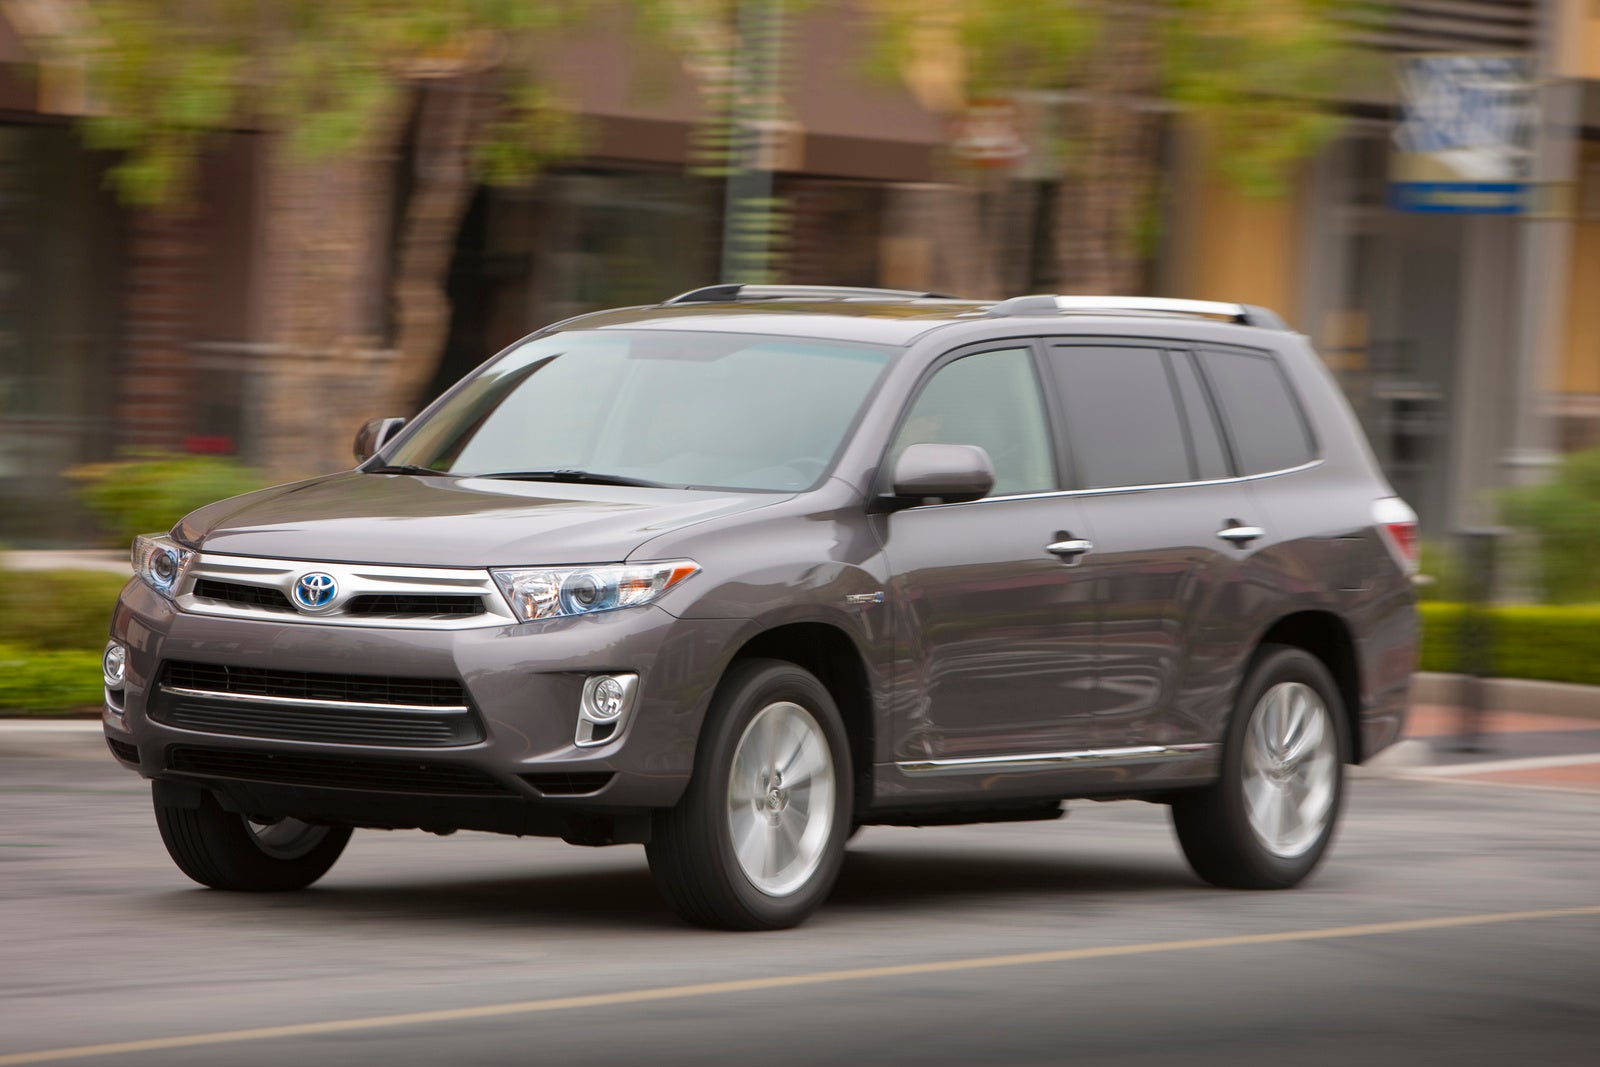 pictures of the toyota highlander #7